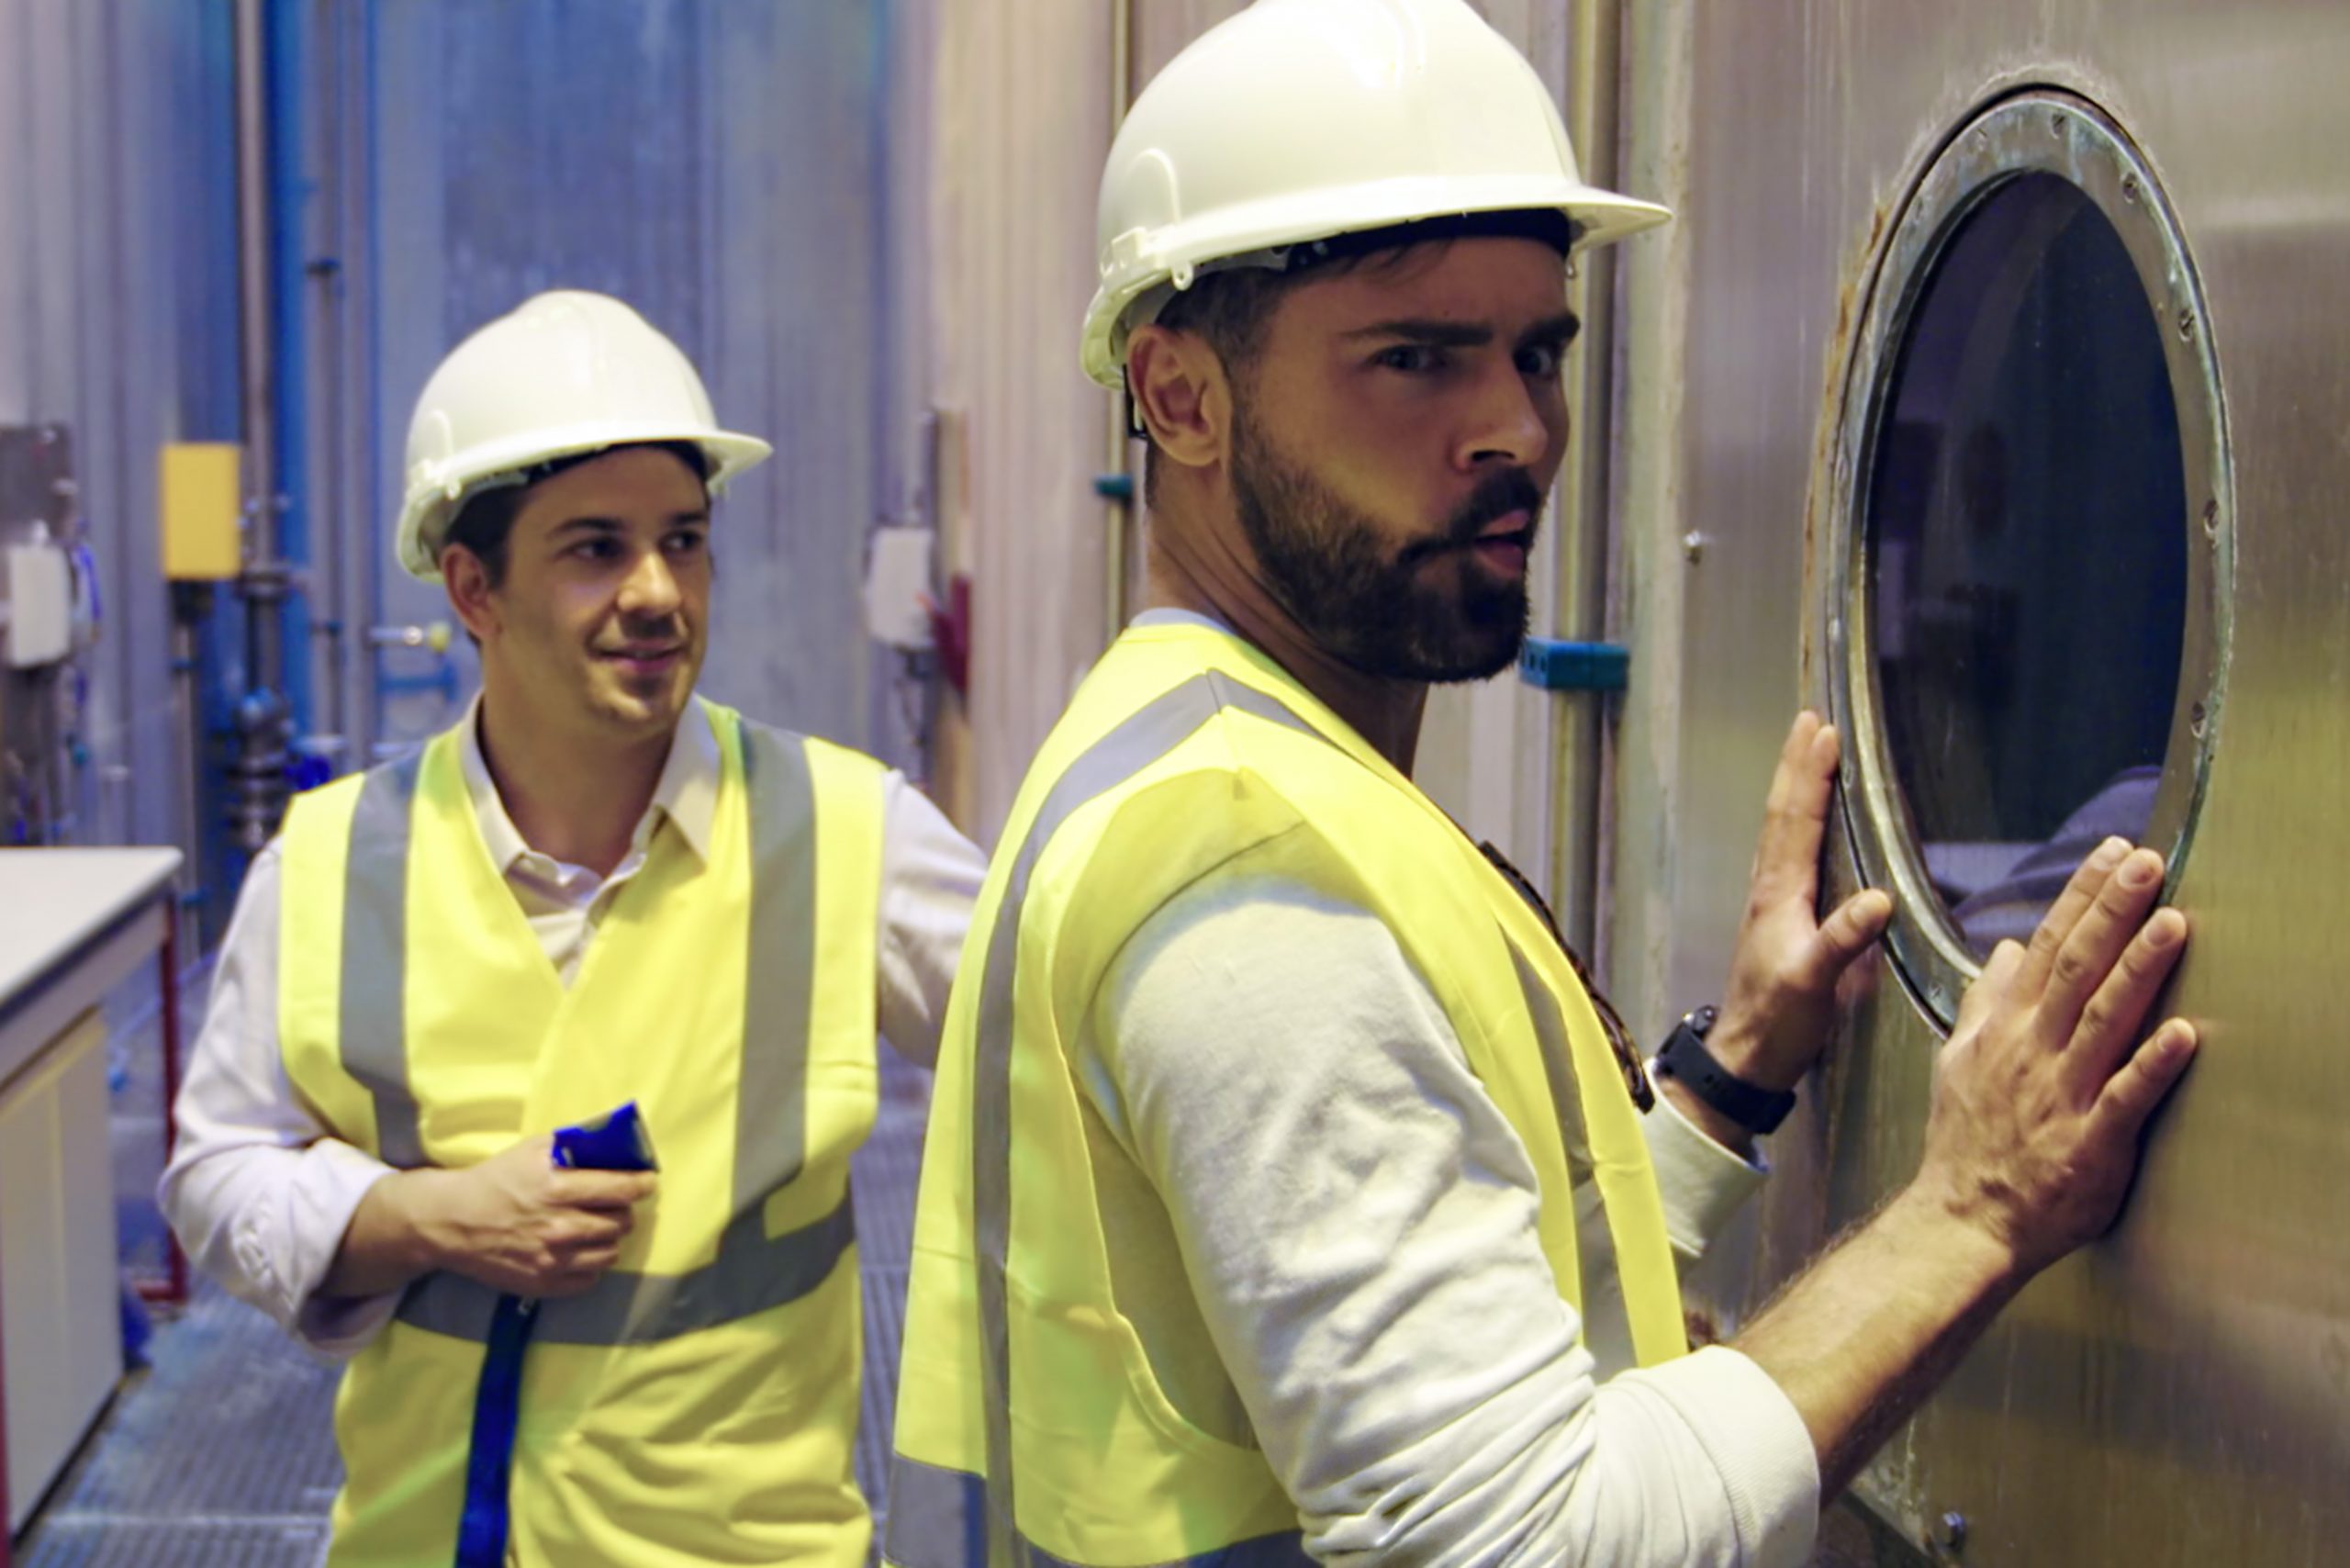 Nacelle Company on X: Our new show, Down to Earth with Zac Efron